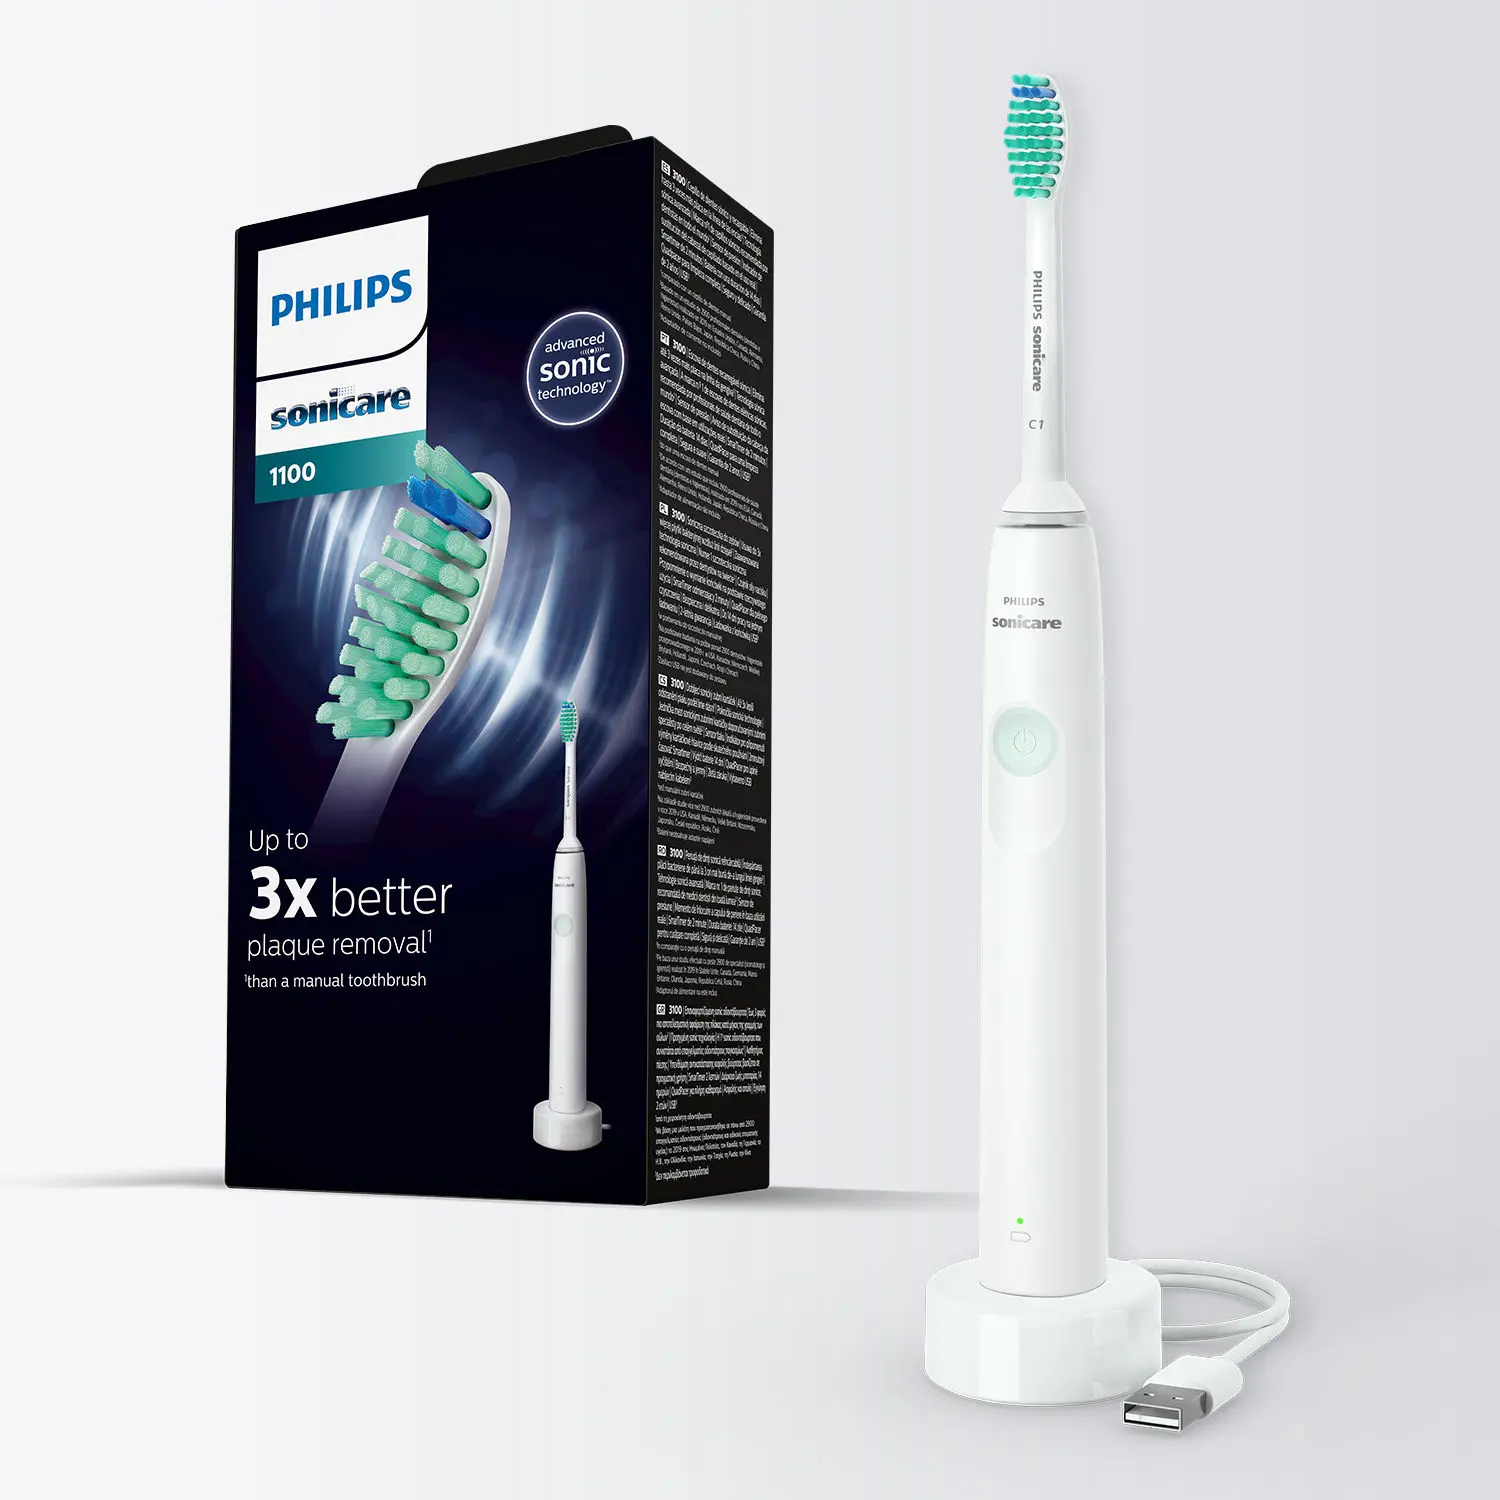 Philips Sonicare ElectricToothbrush - Galway 1100 Series. Built in pressure sensor, Easy Start tech, Quad Pacer , 2 minute smart timer HX3641/11